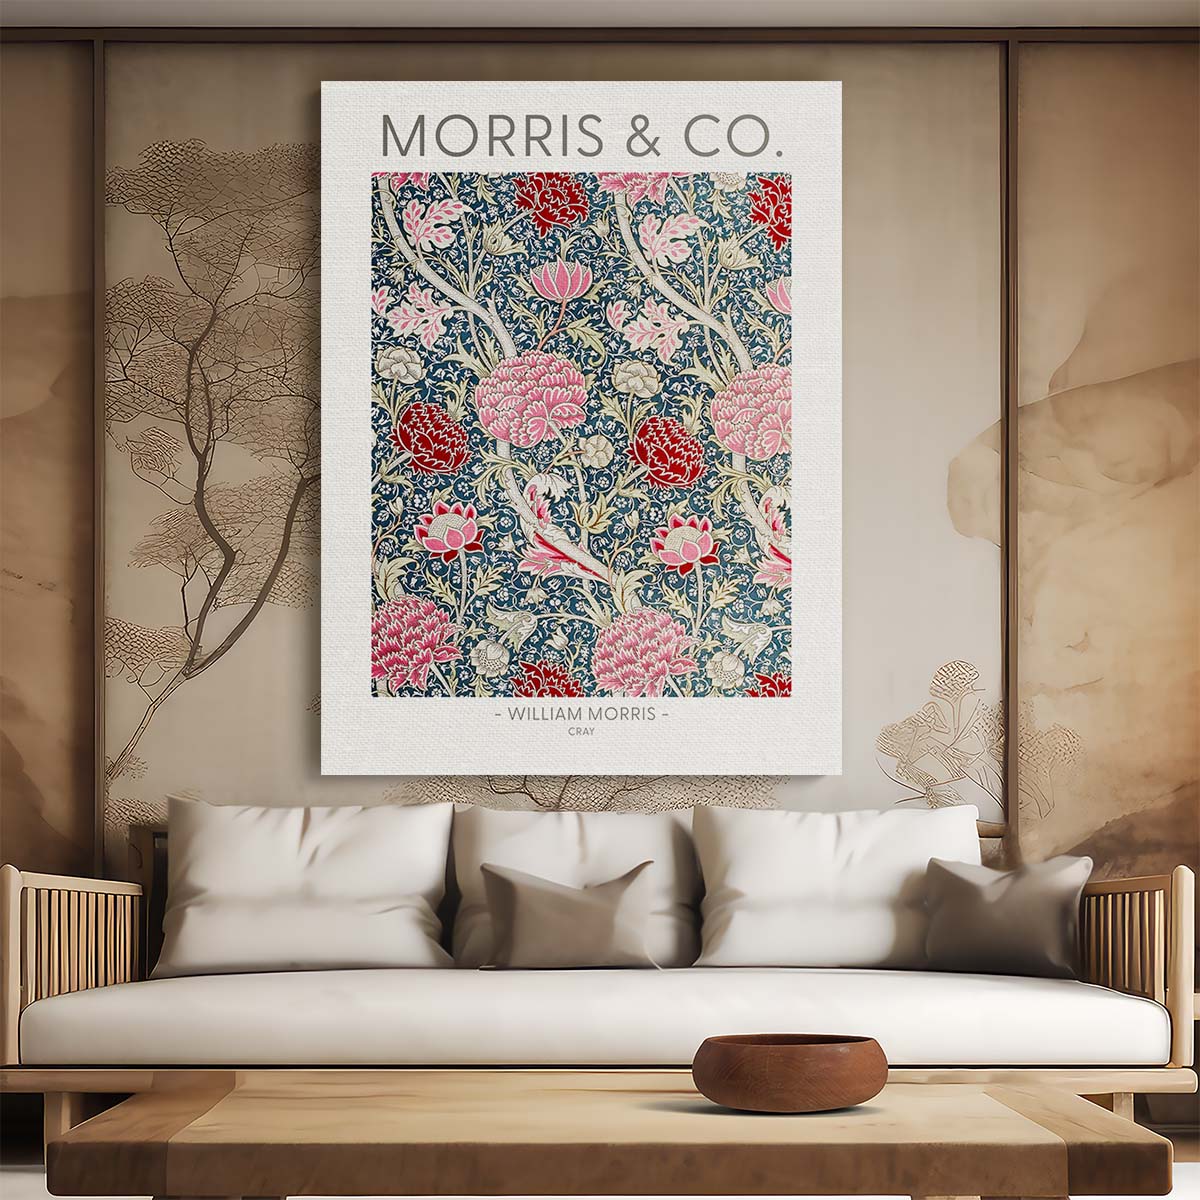 Vintage William Morris Floral Botanical Illustration Poster by Luxuriance Designs, made in USA